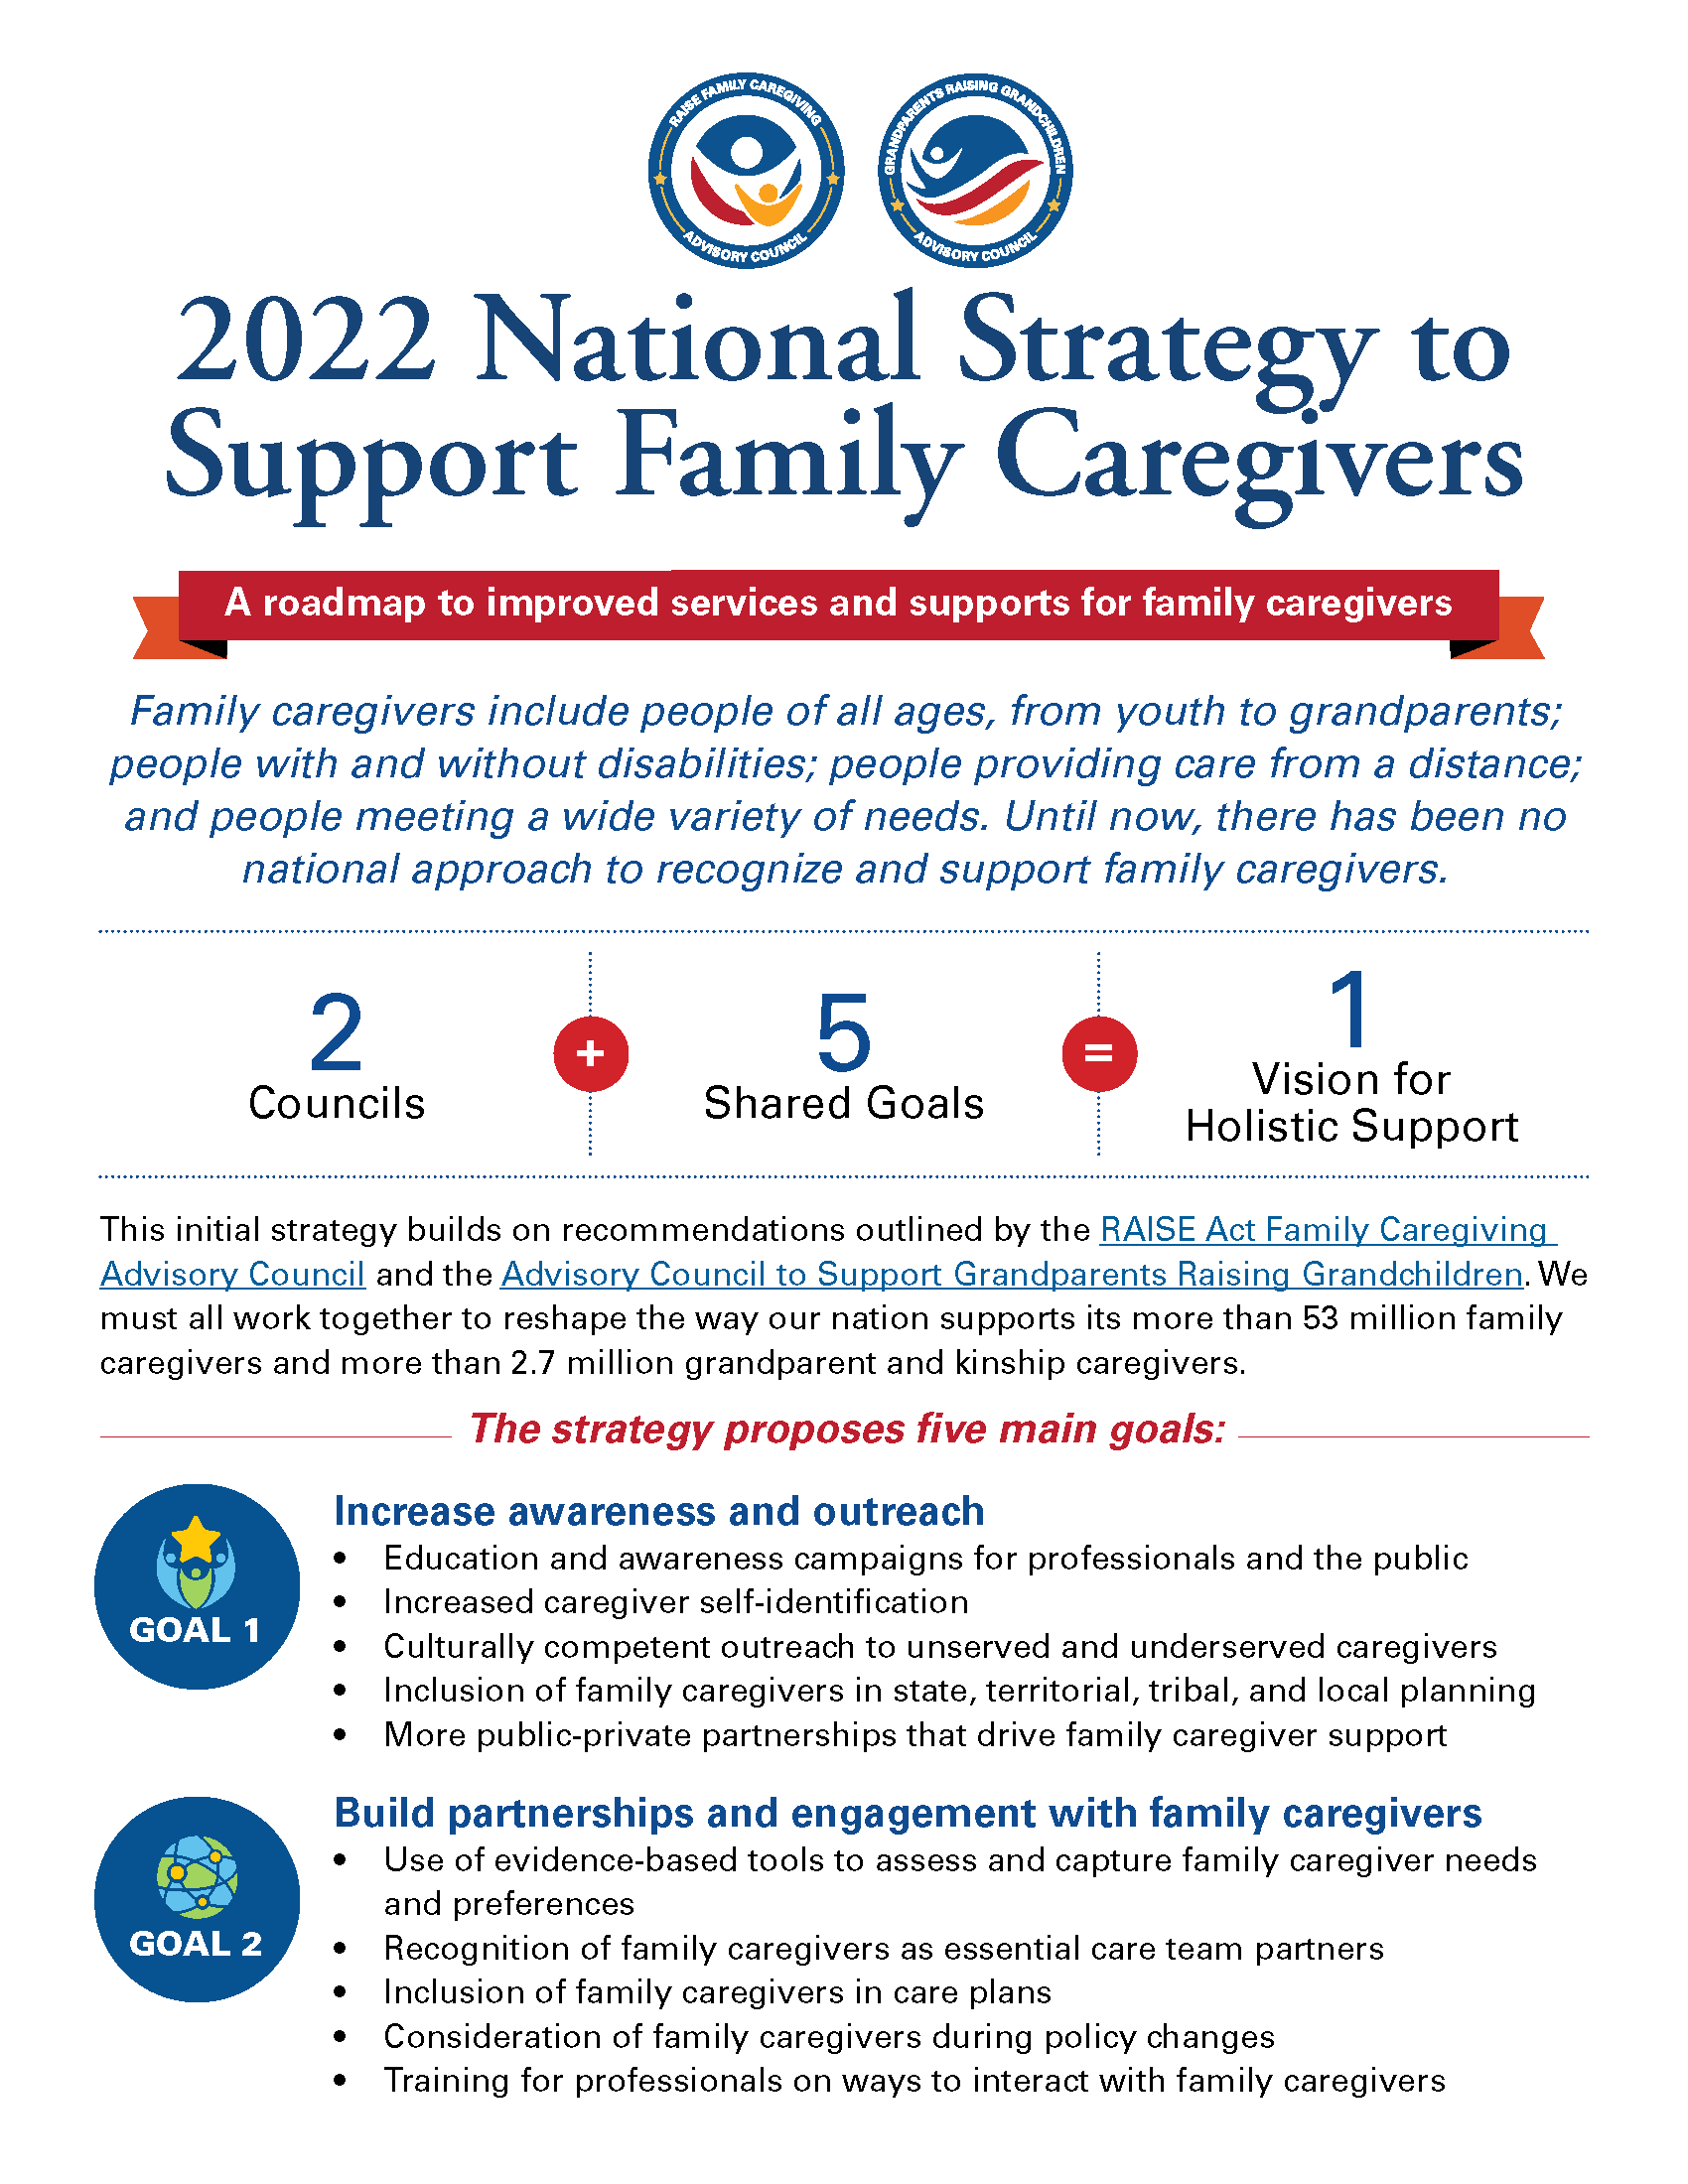 NatStrategyFamCaregivers Infographic Page 1